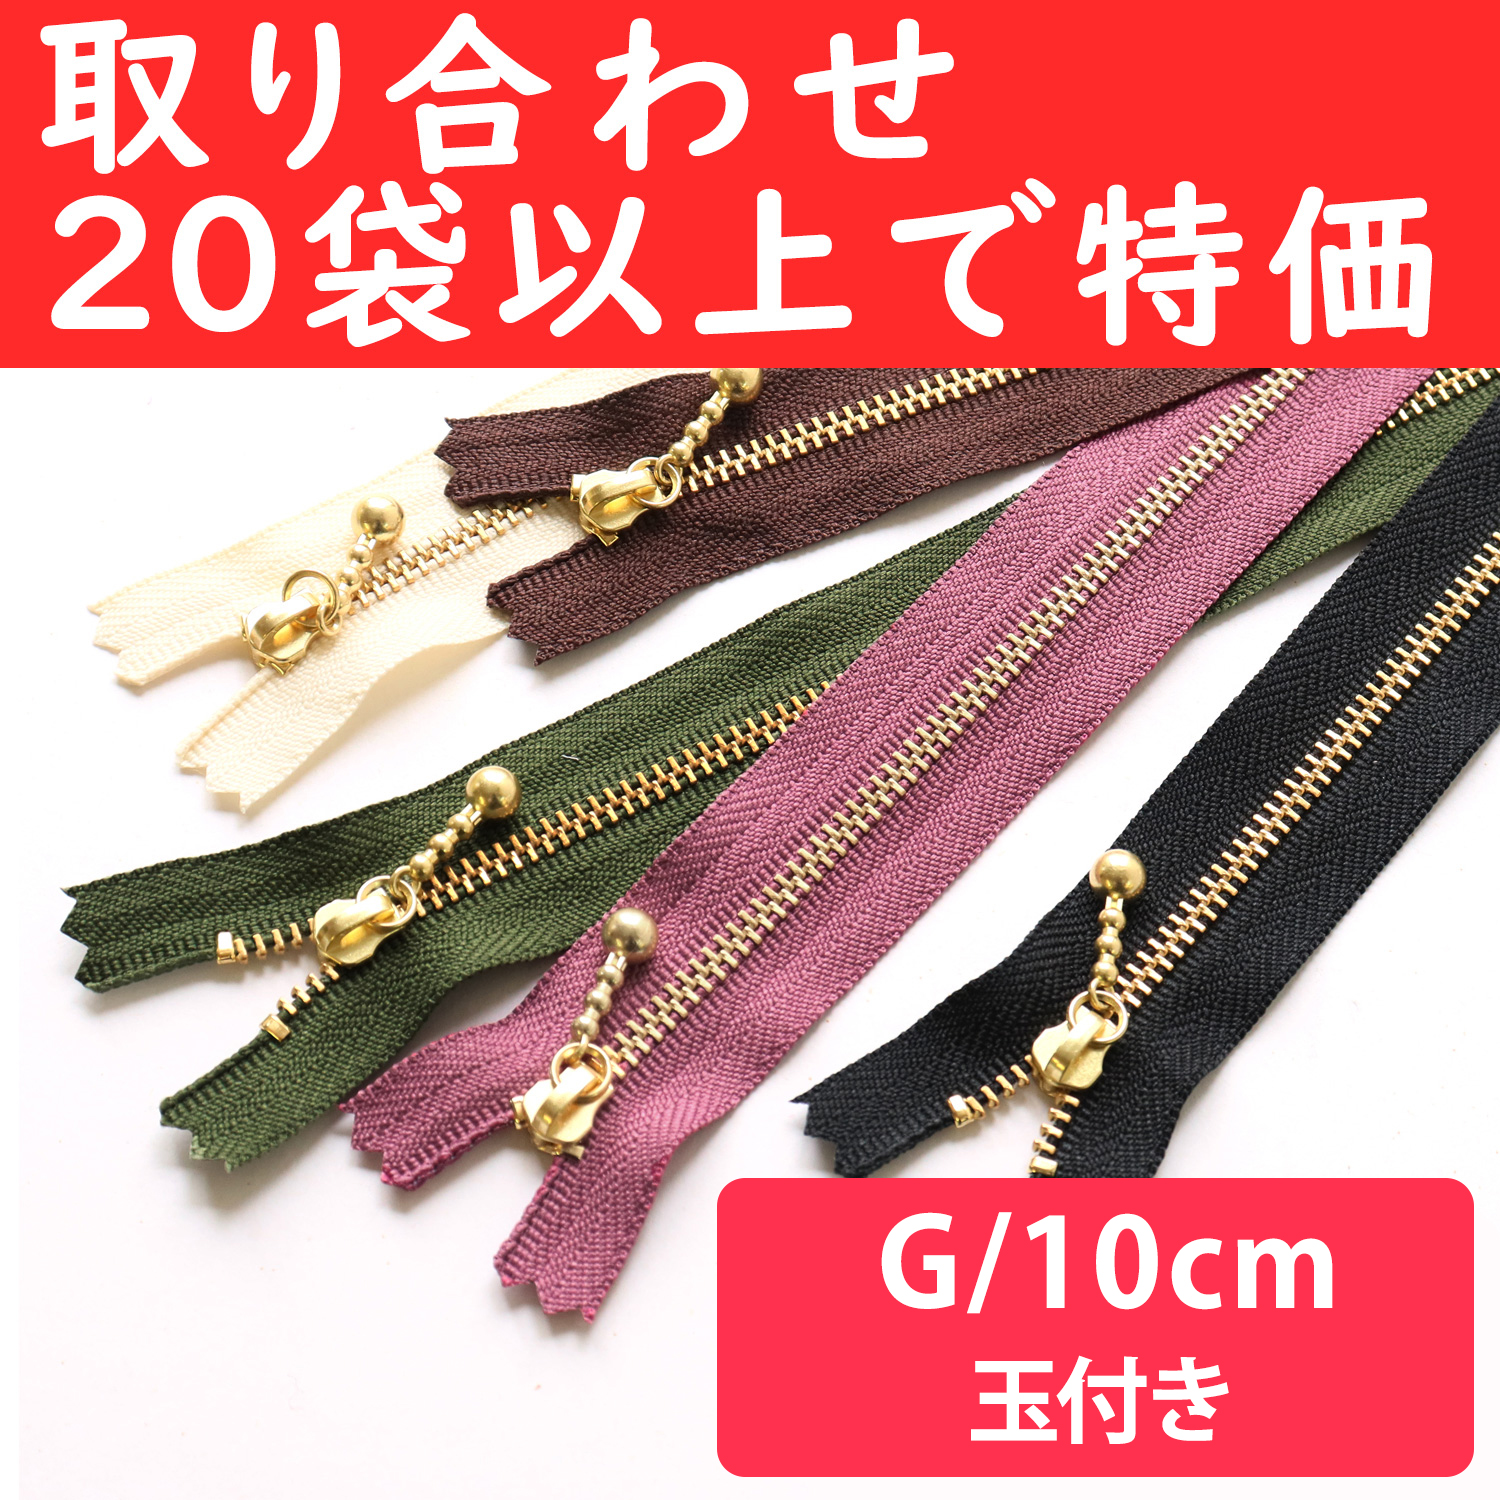 3G10-OVER200 Special)Ball Pull Zippers  G 10cm ", orders with 20 bags or more (bag)